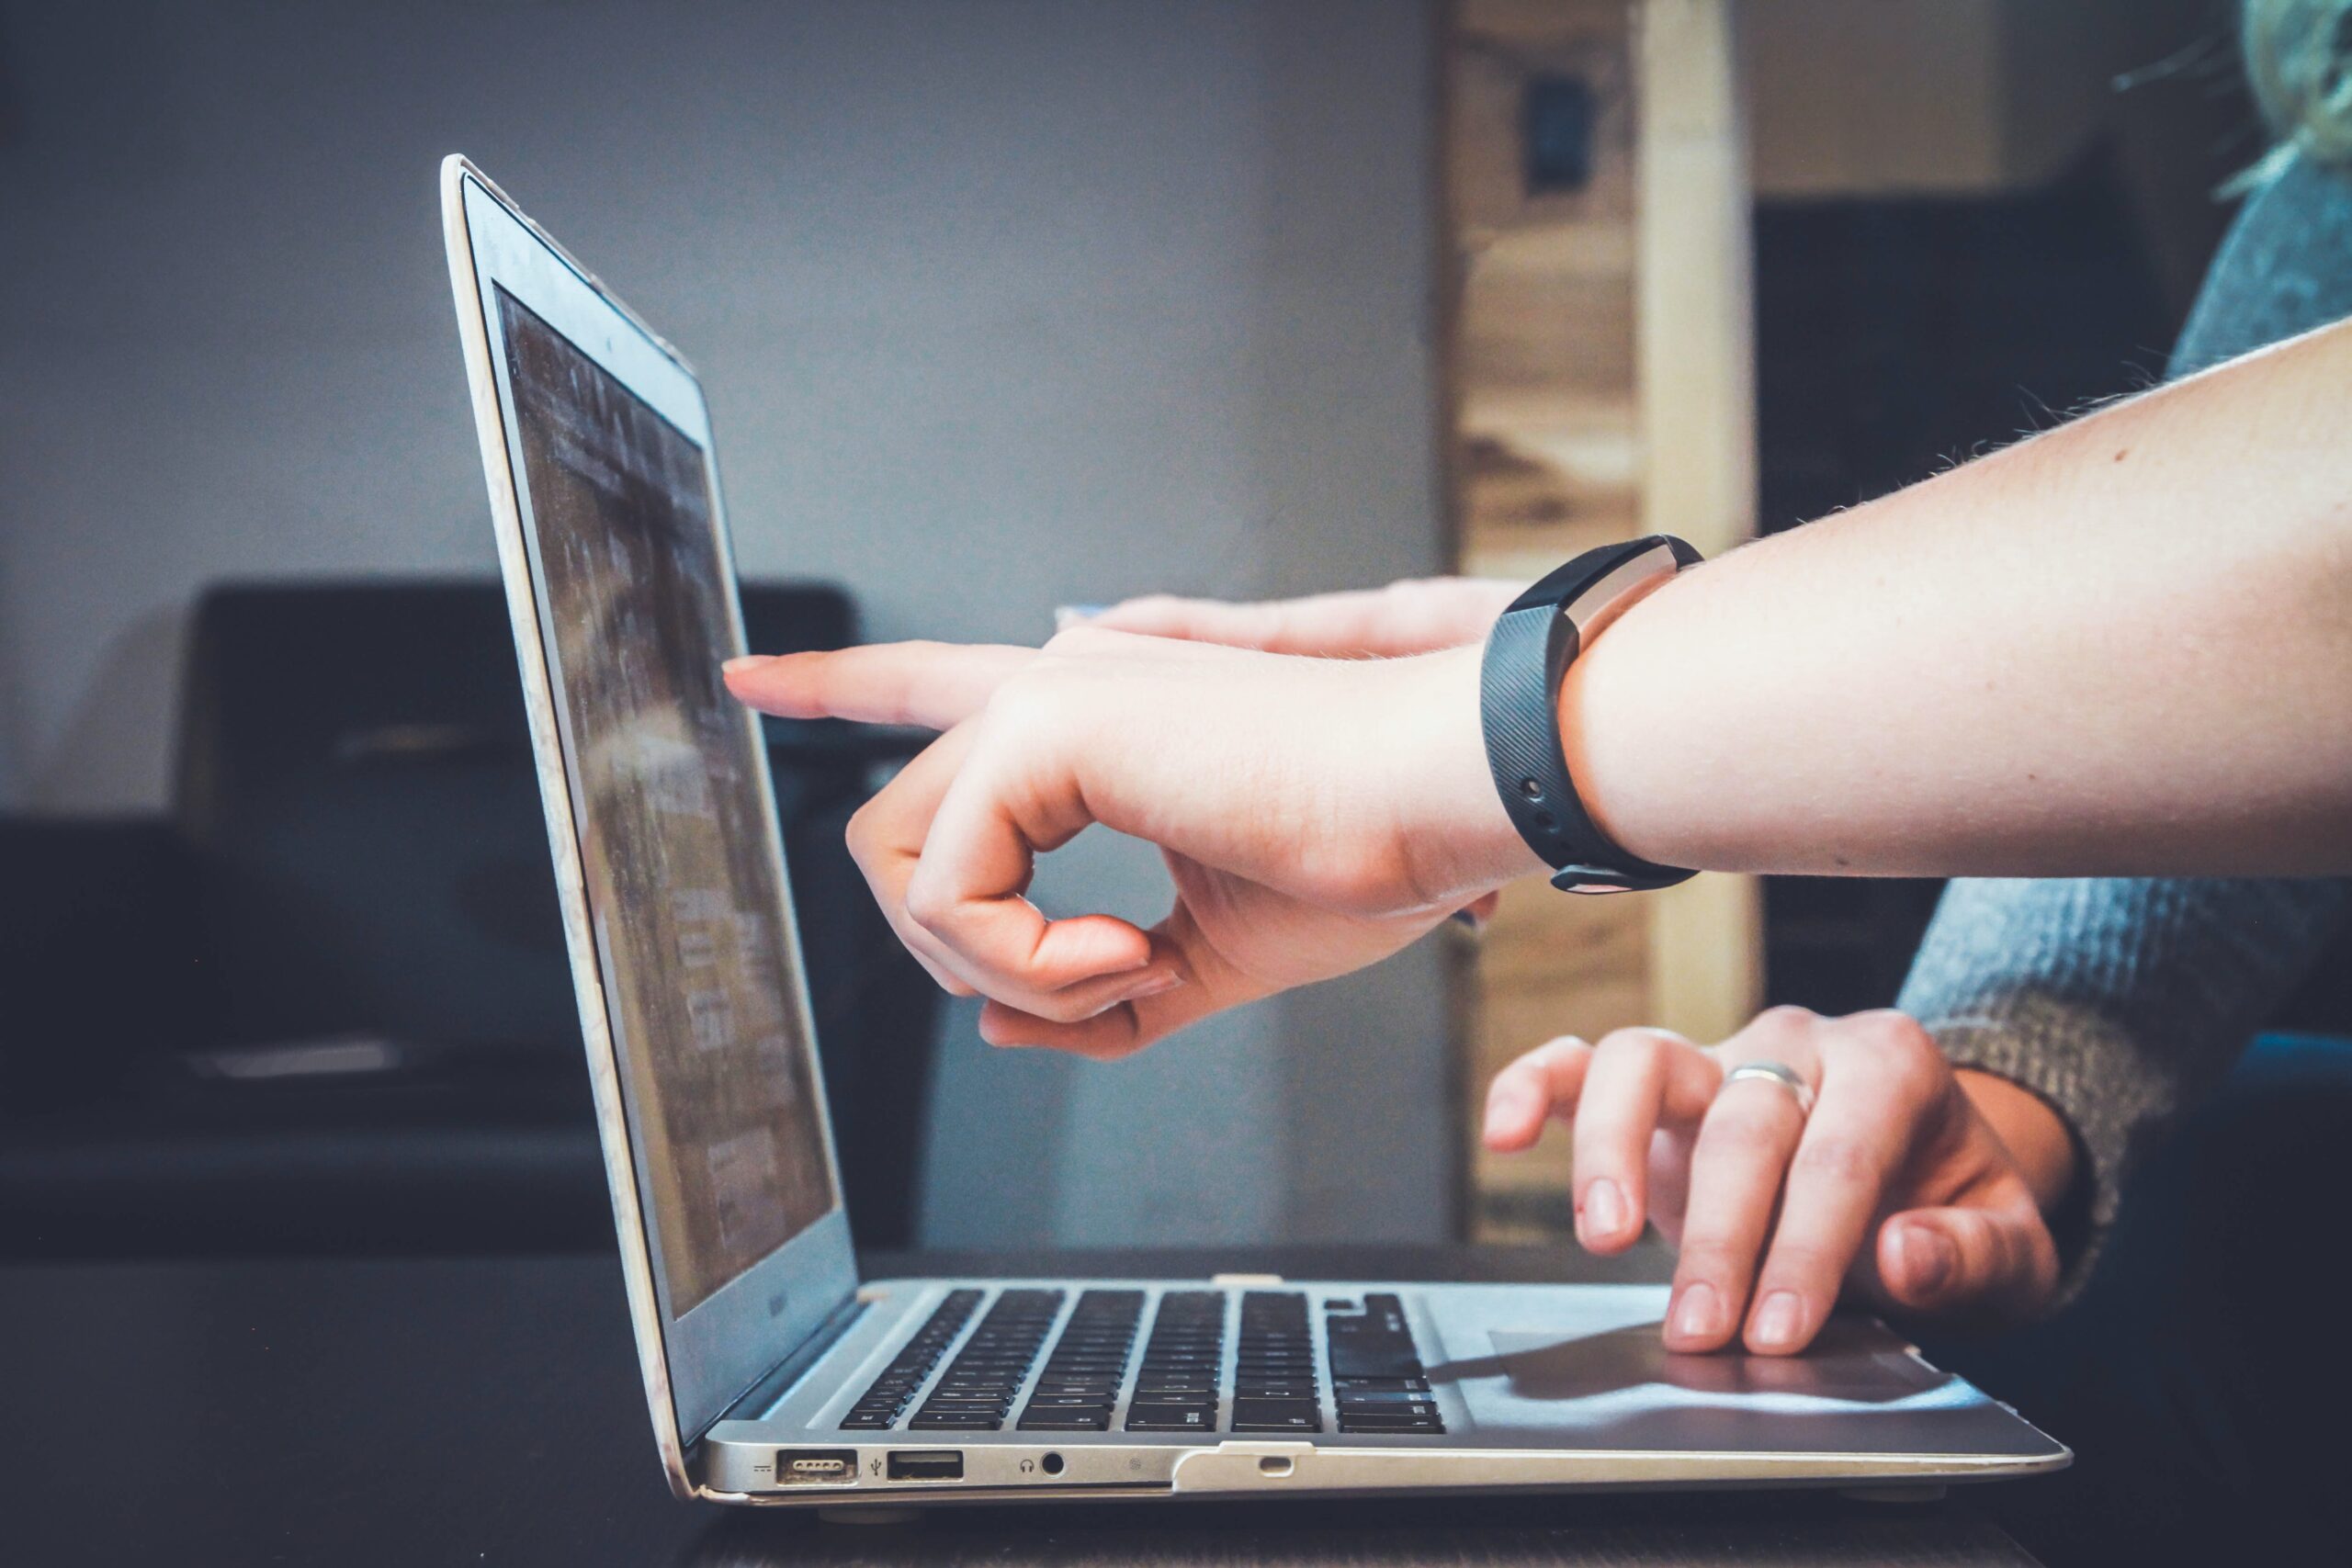 How to hire TypeScript developers | Picture of someone's left hand pointing at a laptop screen, with another person in the background using the touch pad on the same laptop.